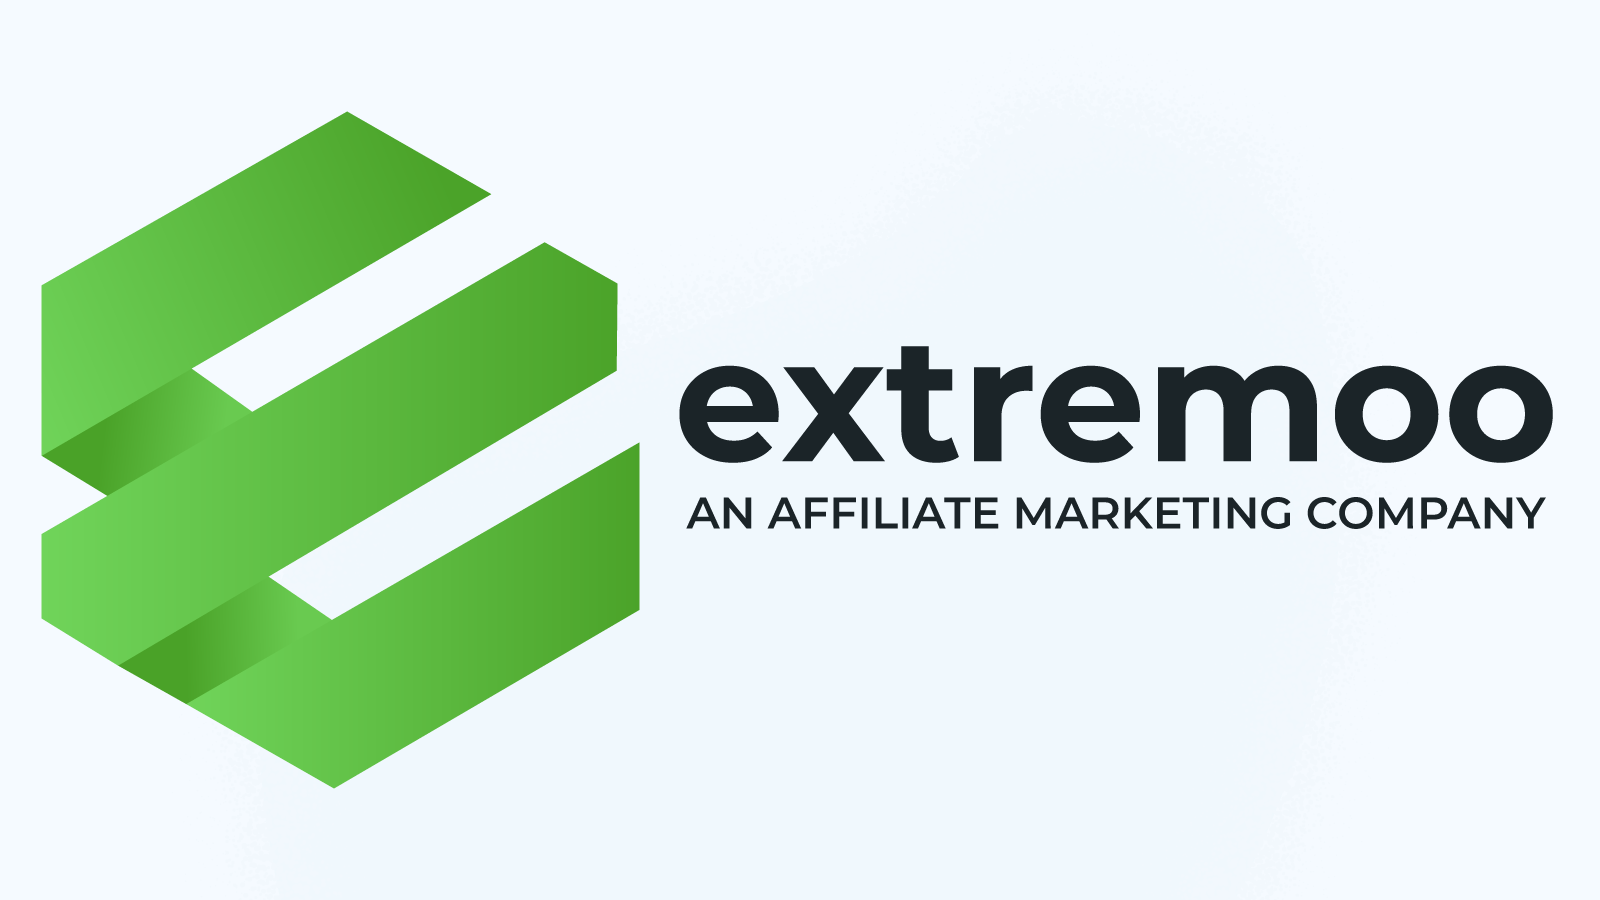 More on Extremoo Marketing Group, the Owner Company